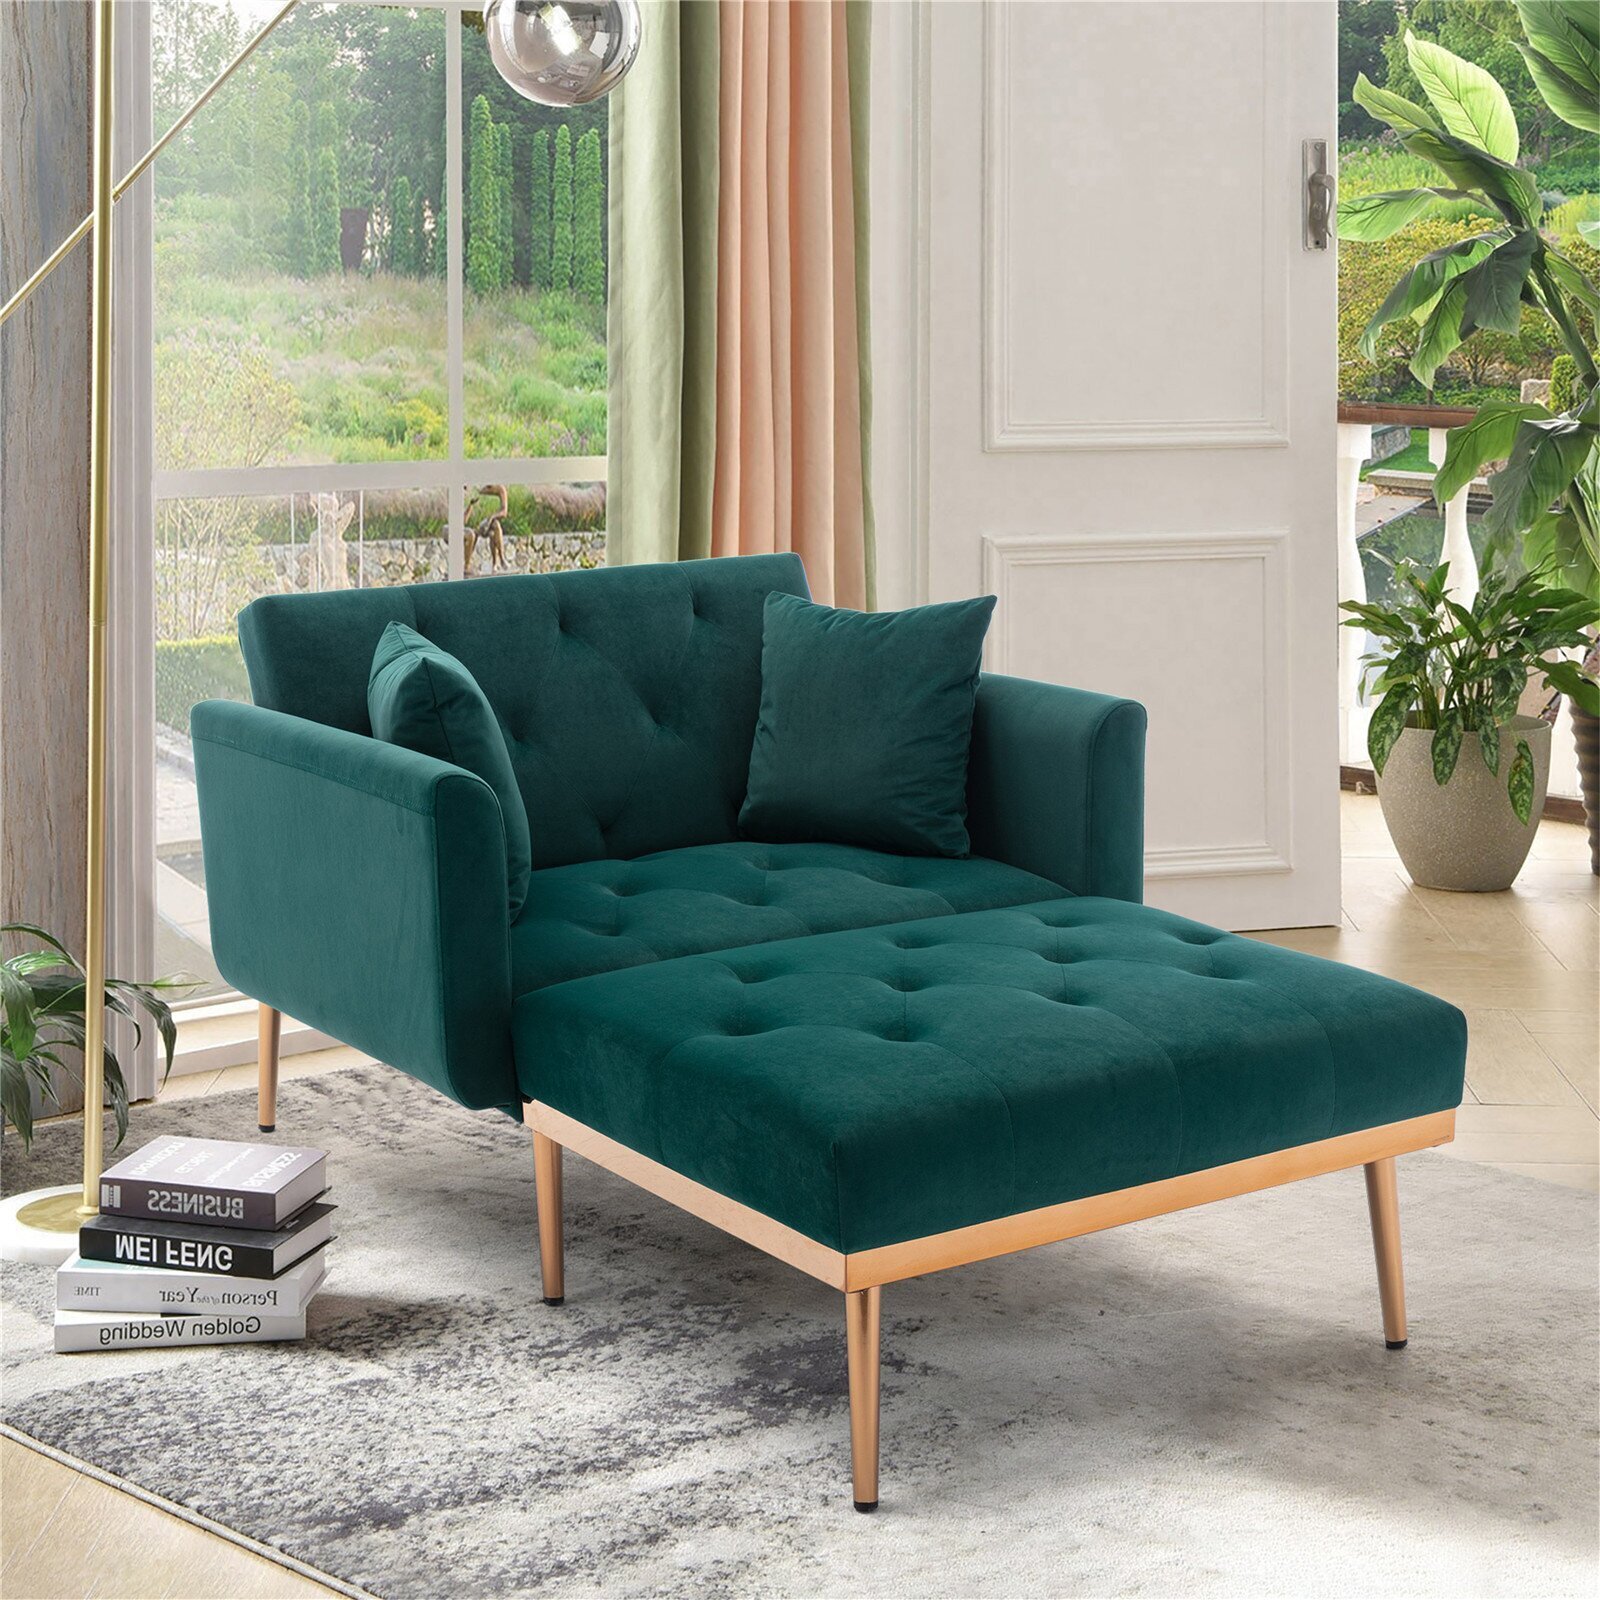 The perfect accent piece: Ergonomic armchair sofa bed with luxe velvet upholstery 